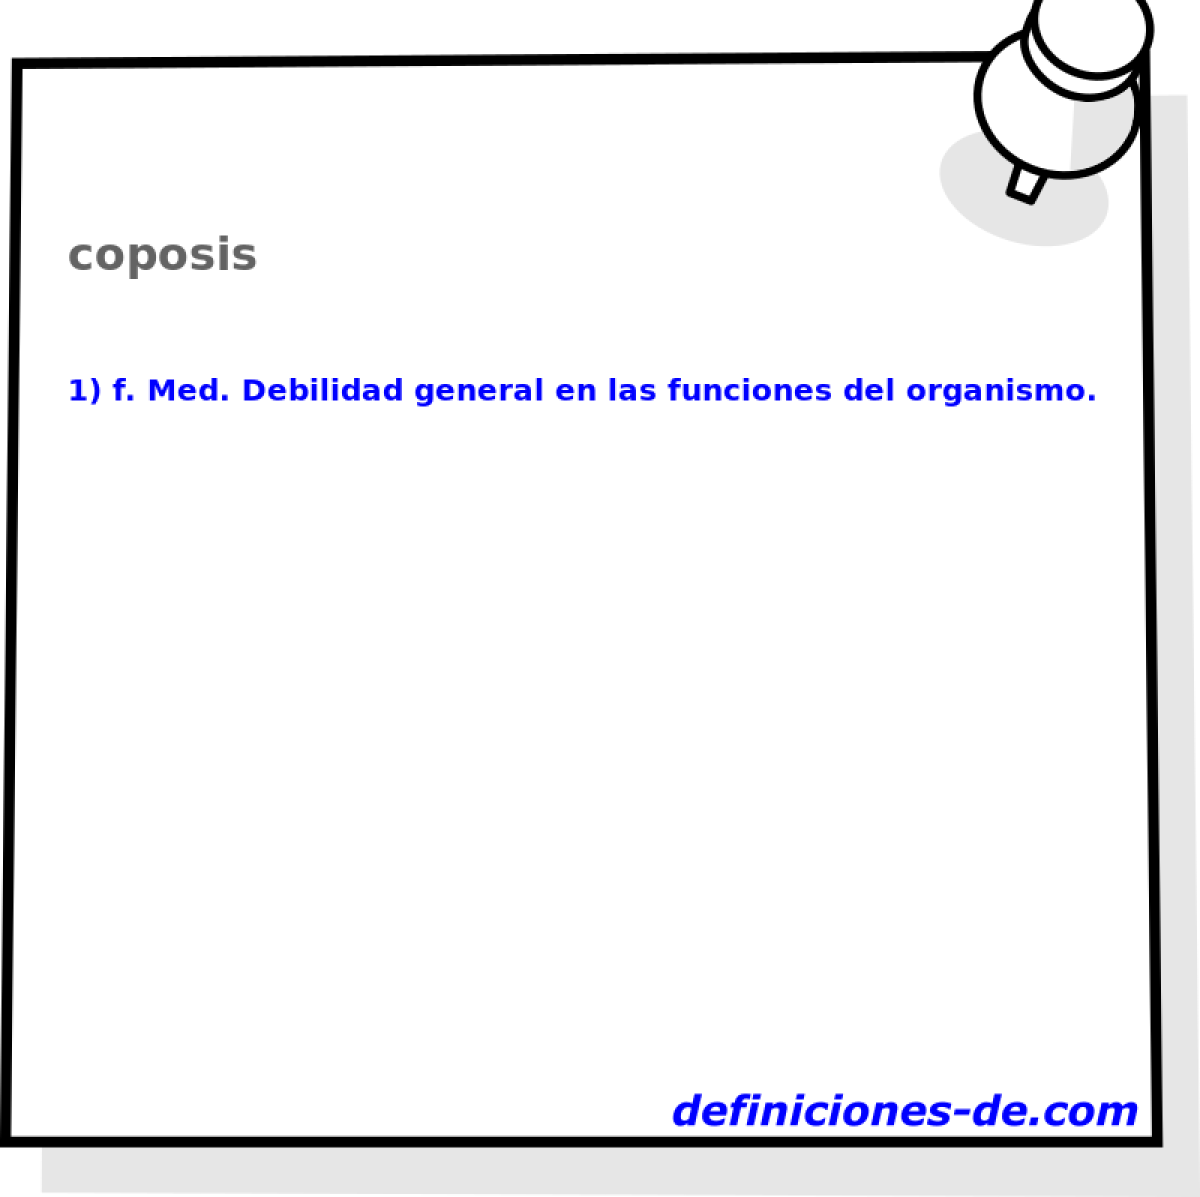 coposis 